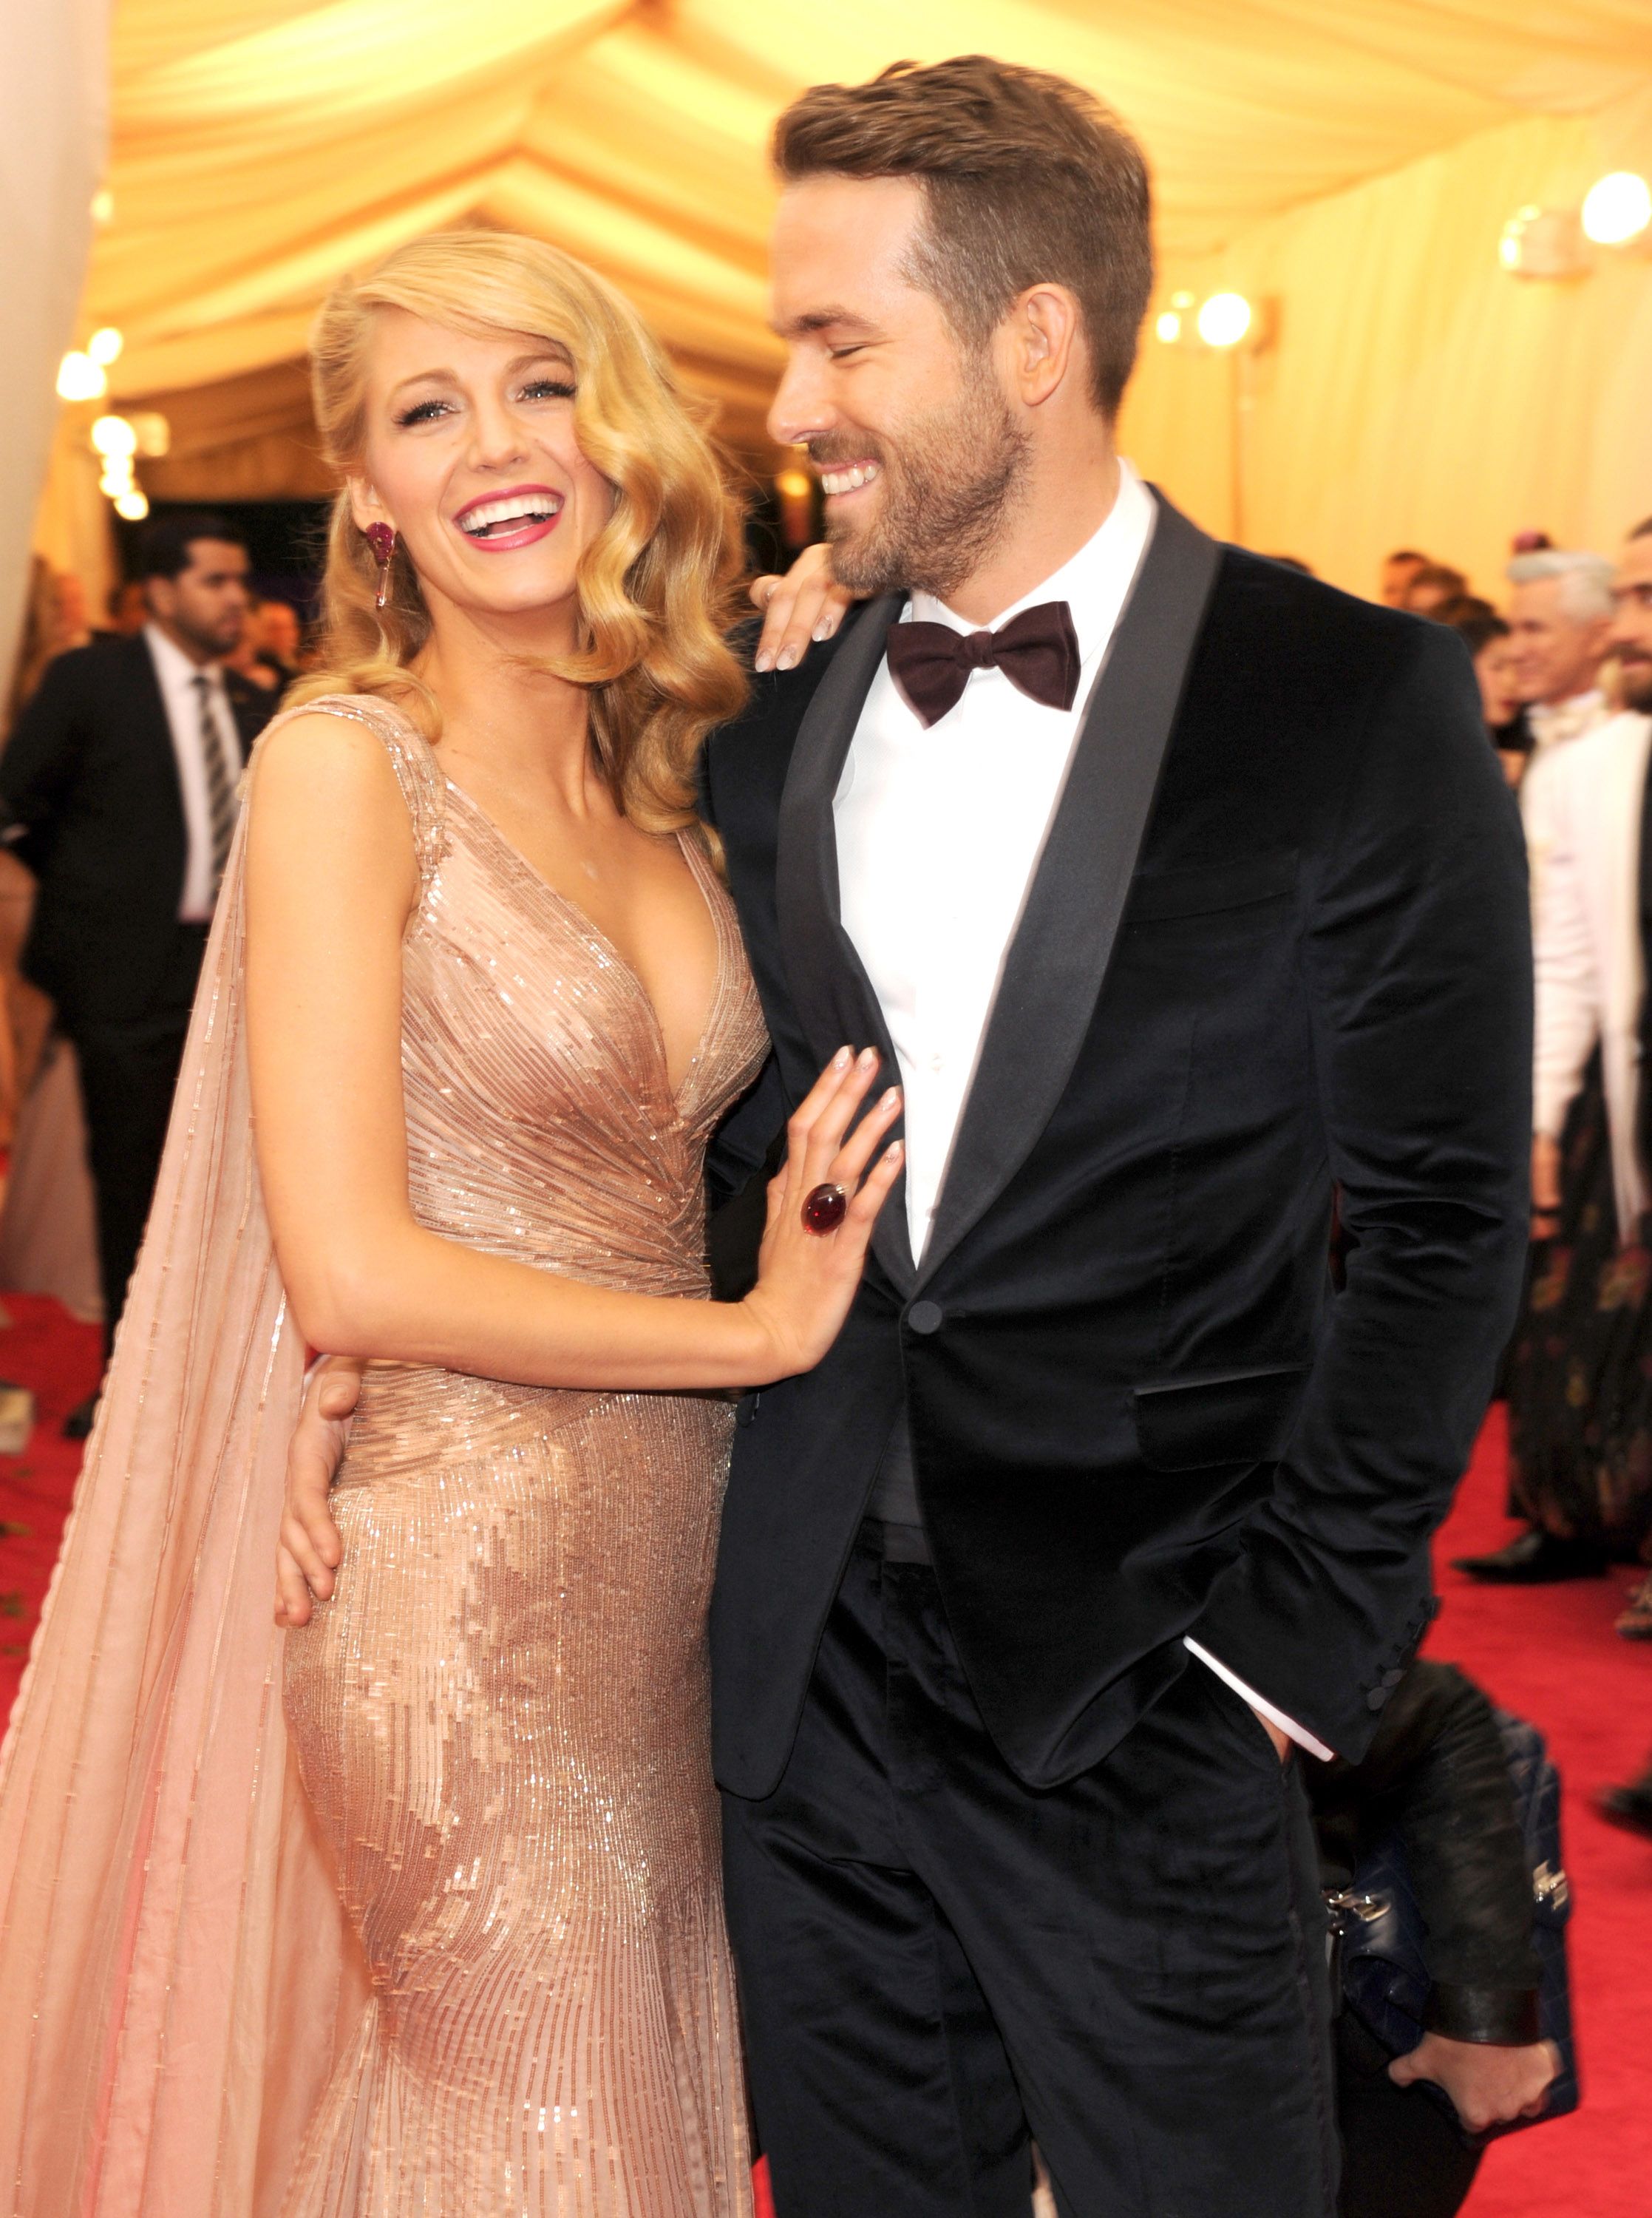 Ryan Reynolds Says Blake Lively Is Going to Give Him a Haircut